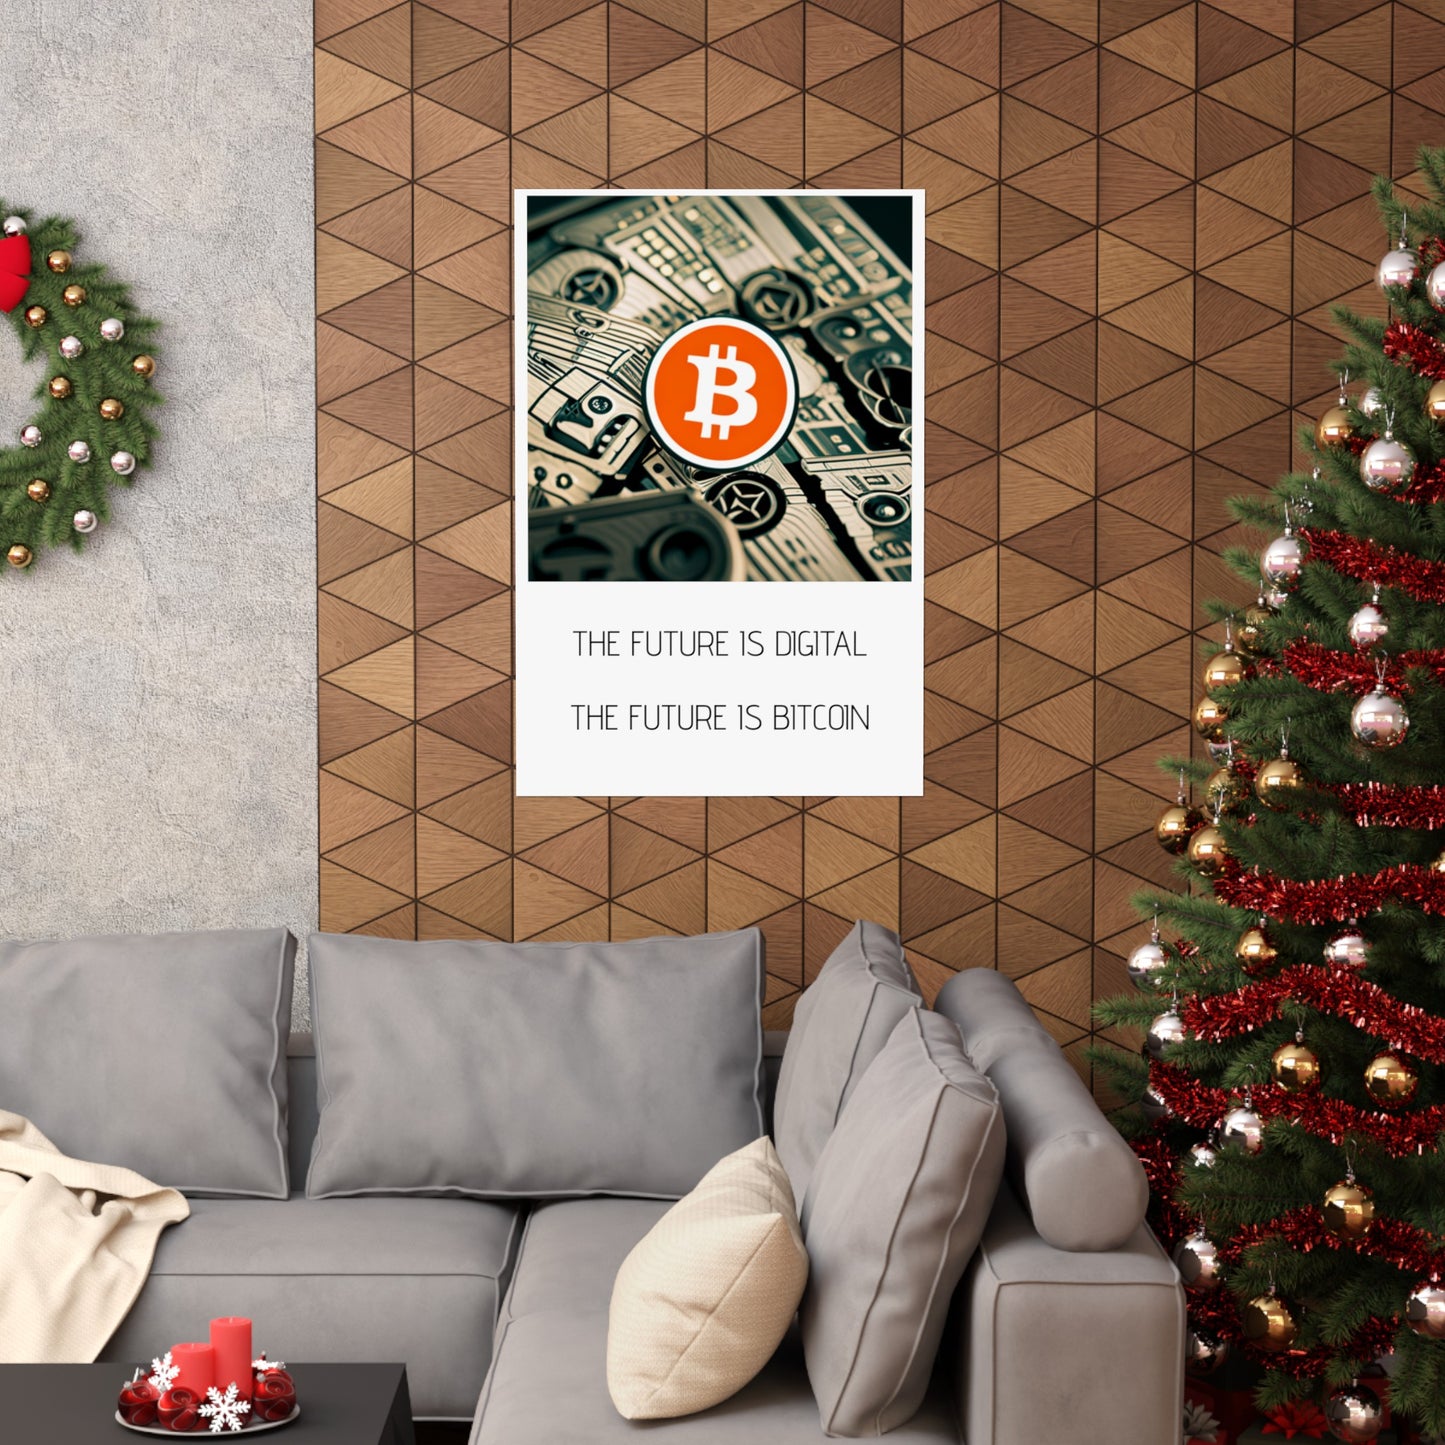 THE FUTURE IS DIGITAL/BITCOIN POSTER